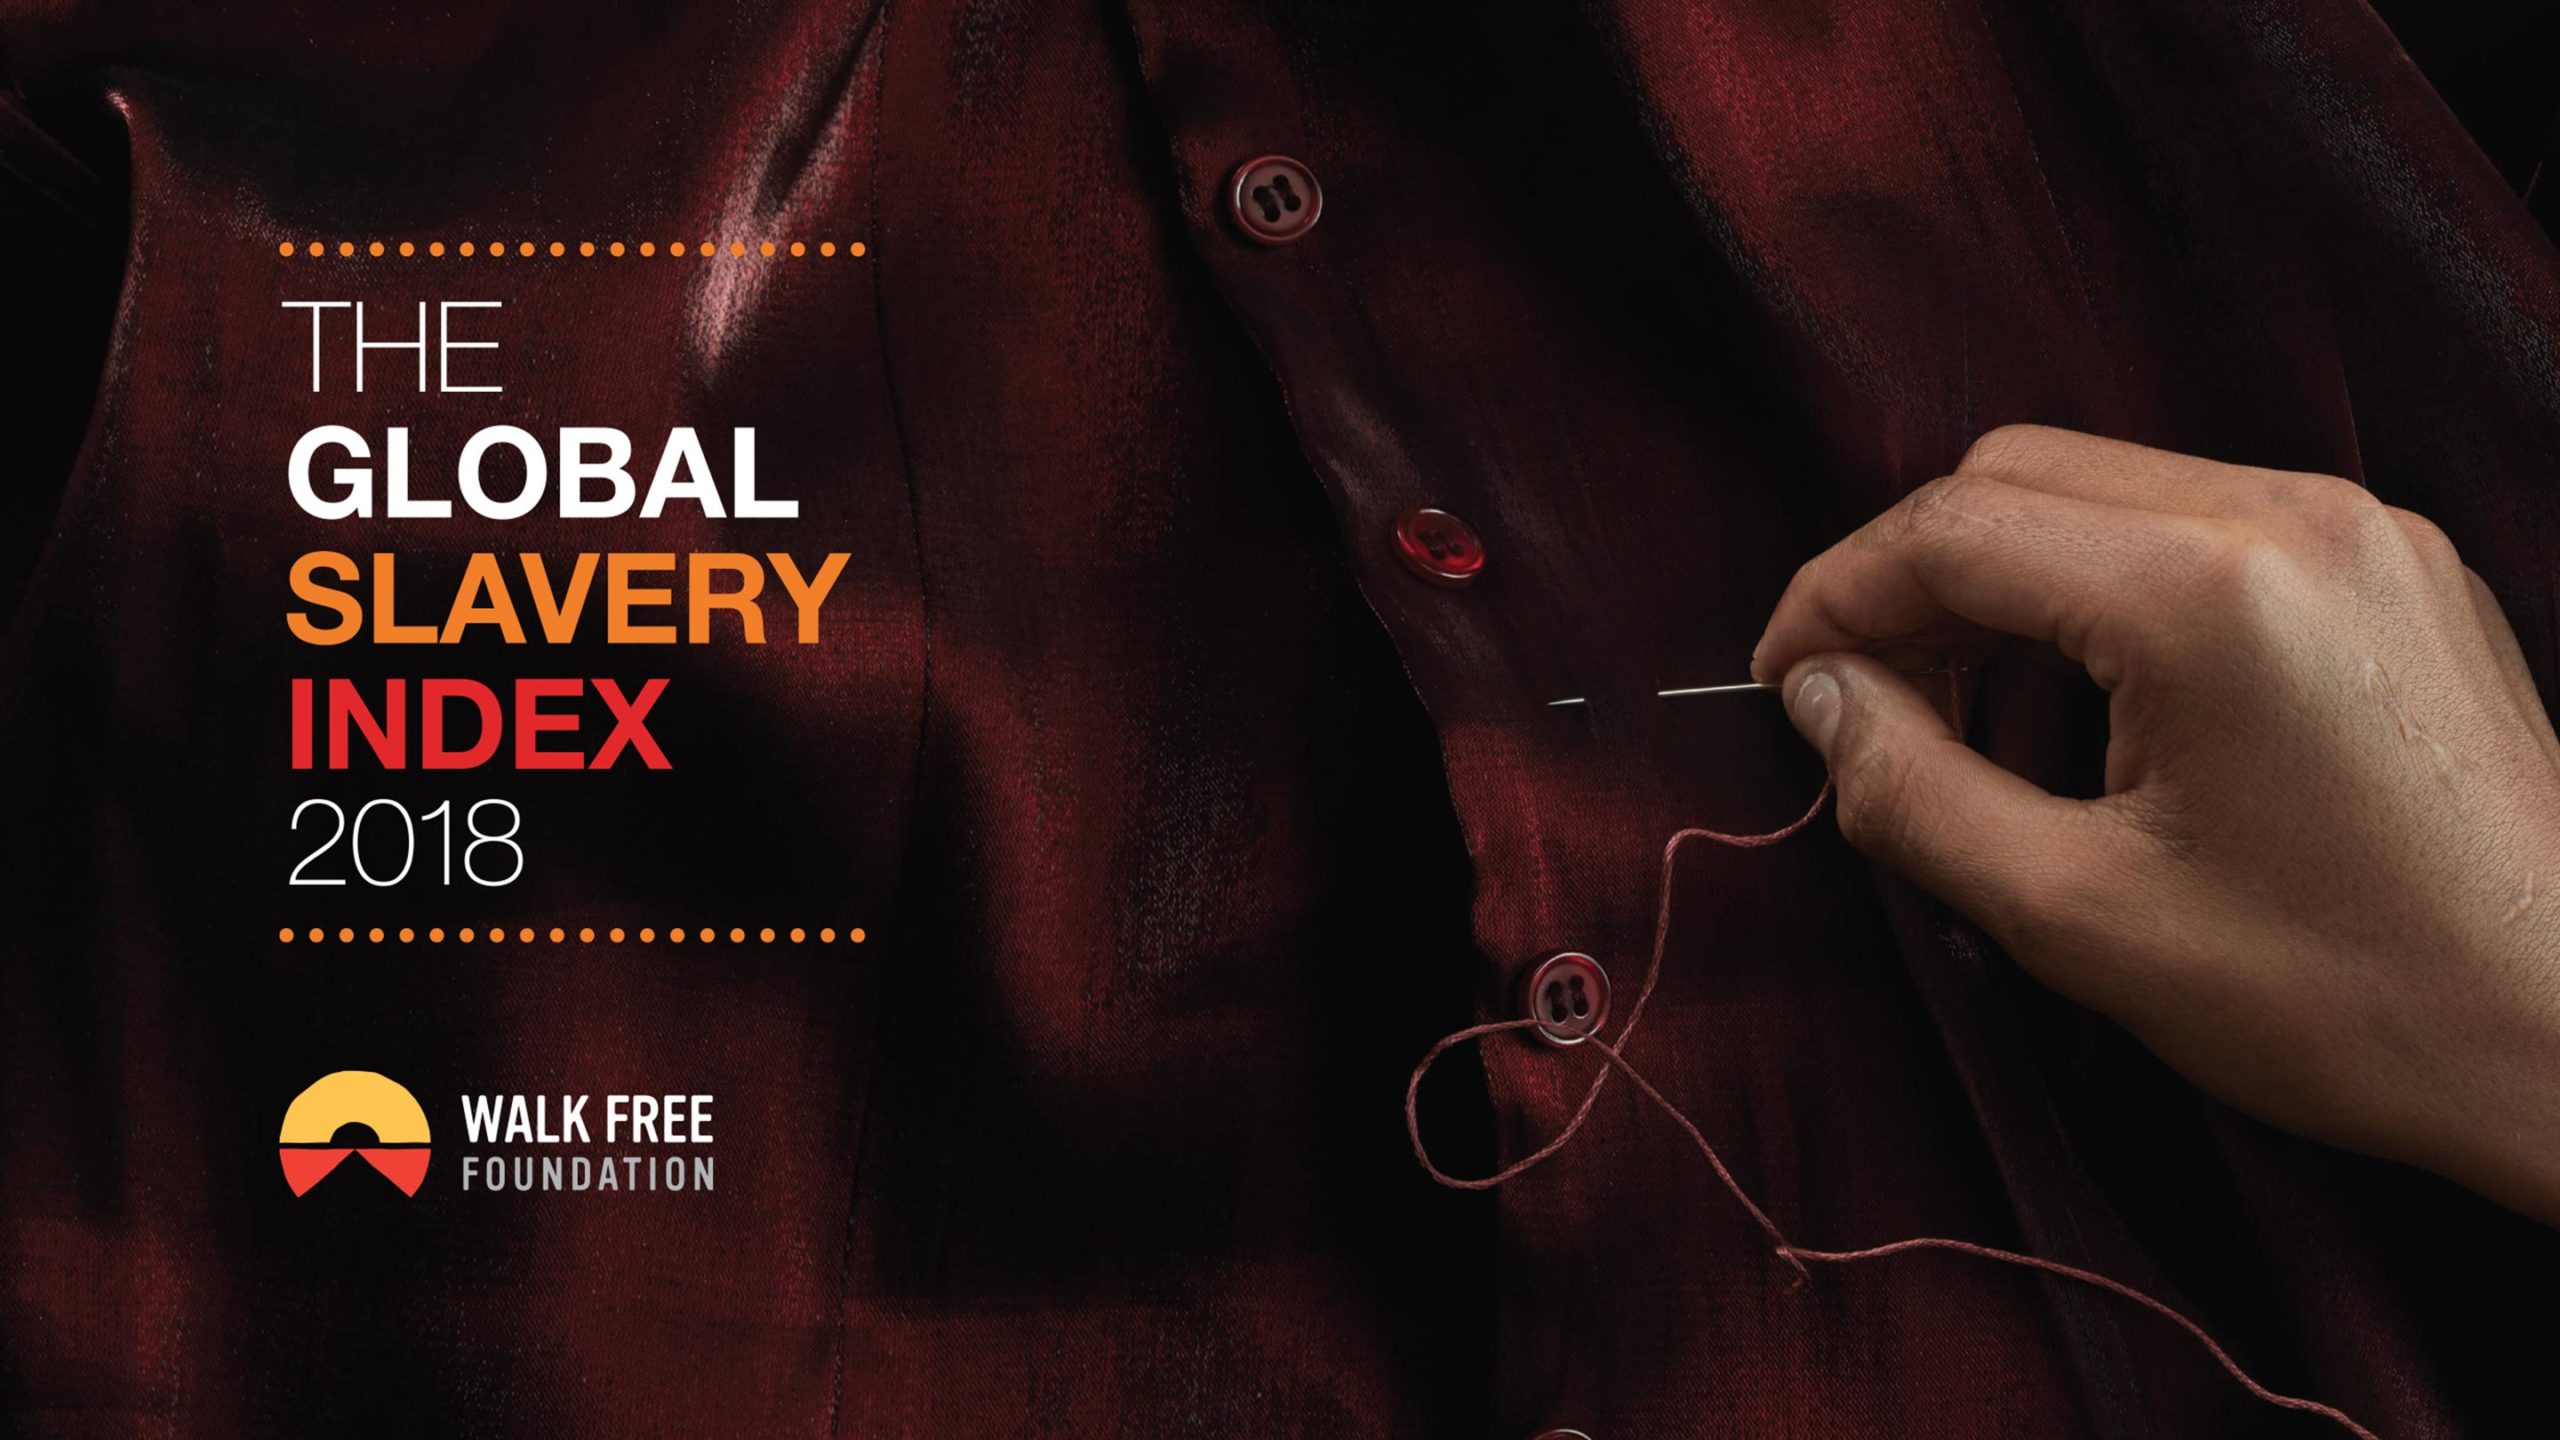 A hand sewing a red shirt in the background with the copy: 'The Global Slavery Index 2018.'